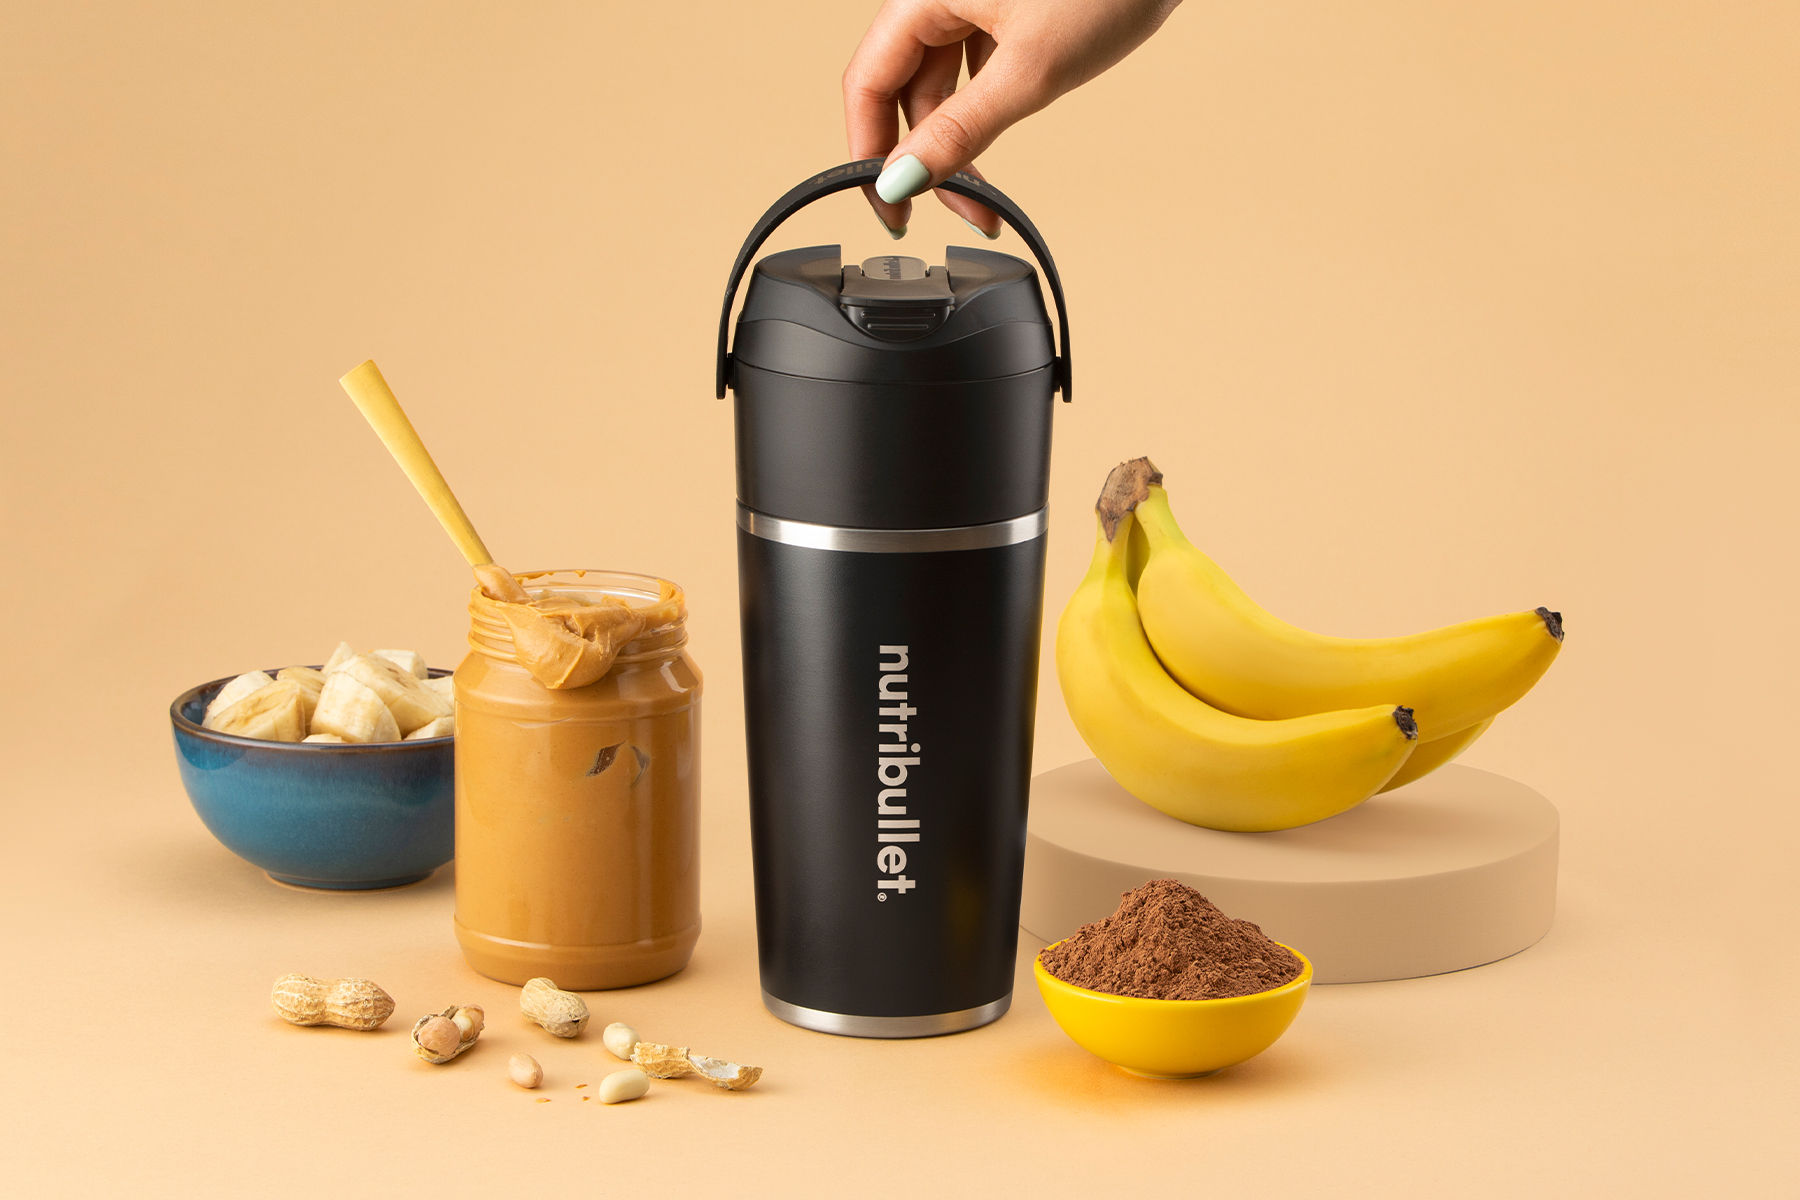 Black nutribullet Flip with peanut butter, bananas, and cacao powder